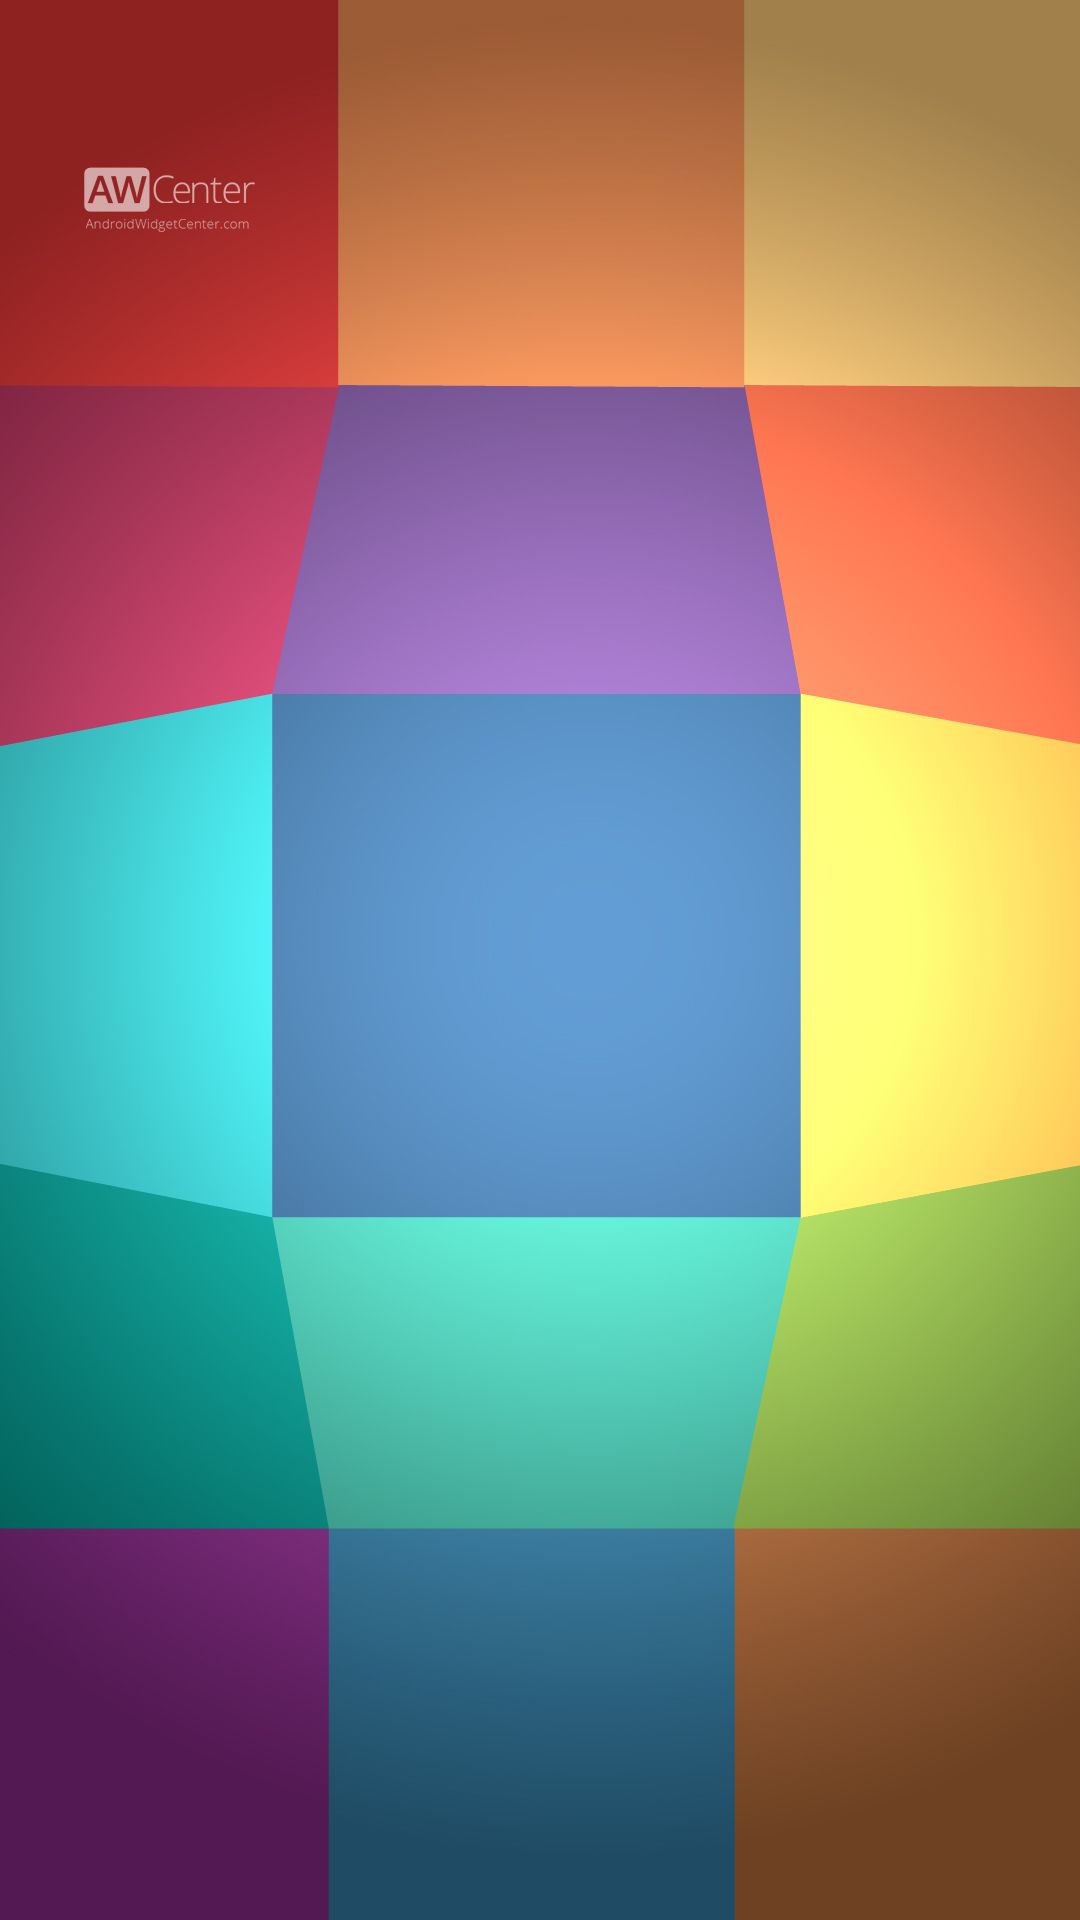 5 Colorful Android Wallpaper - Full HD Screens - Pack 02 | AW Center